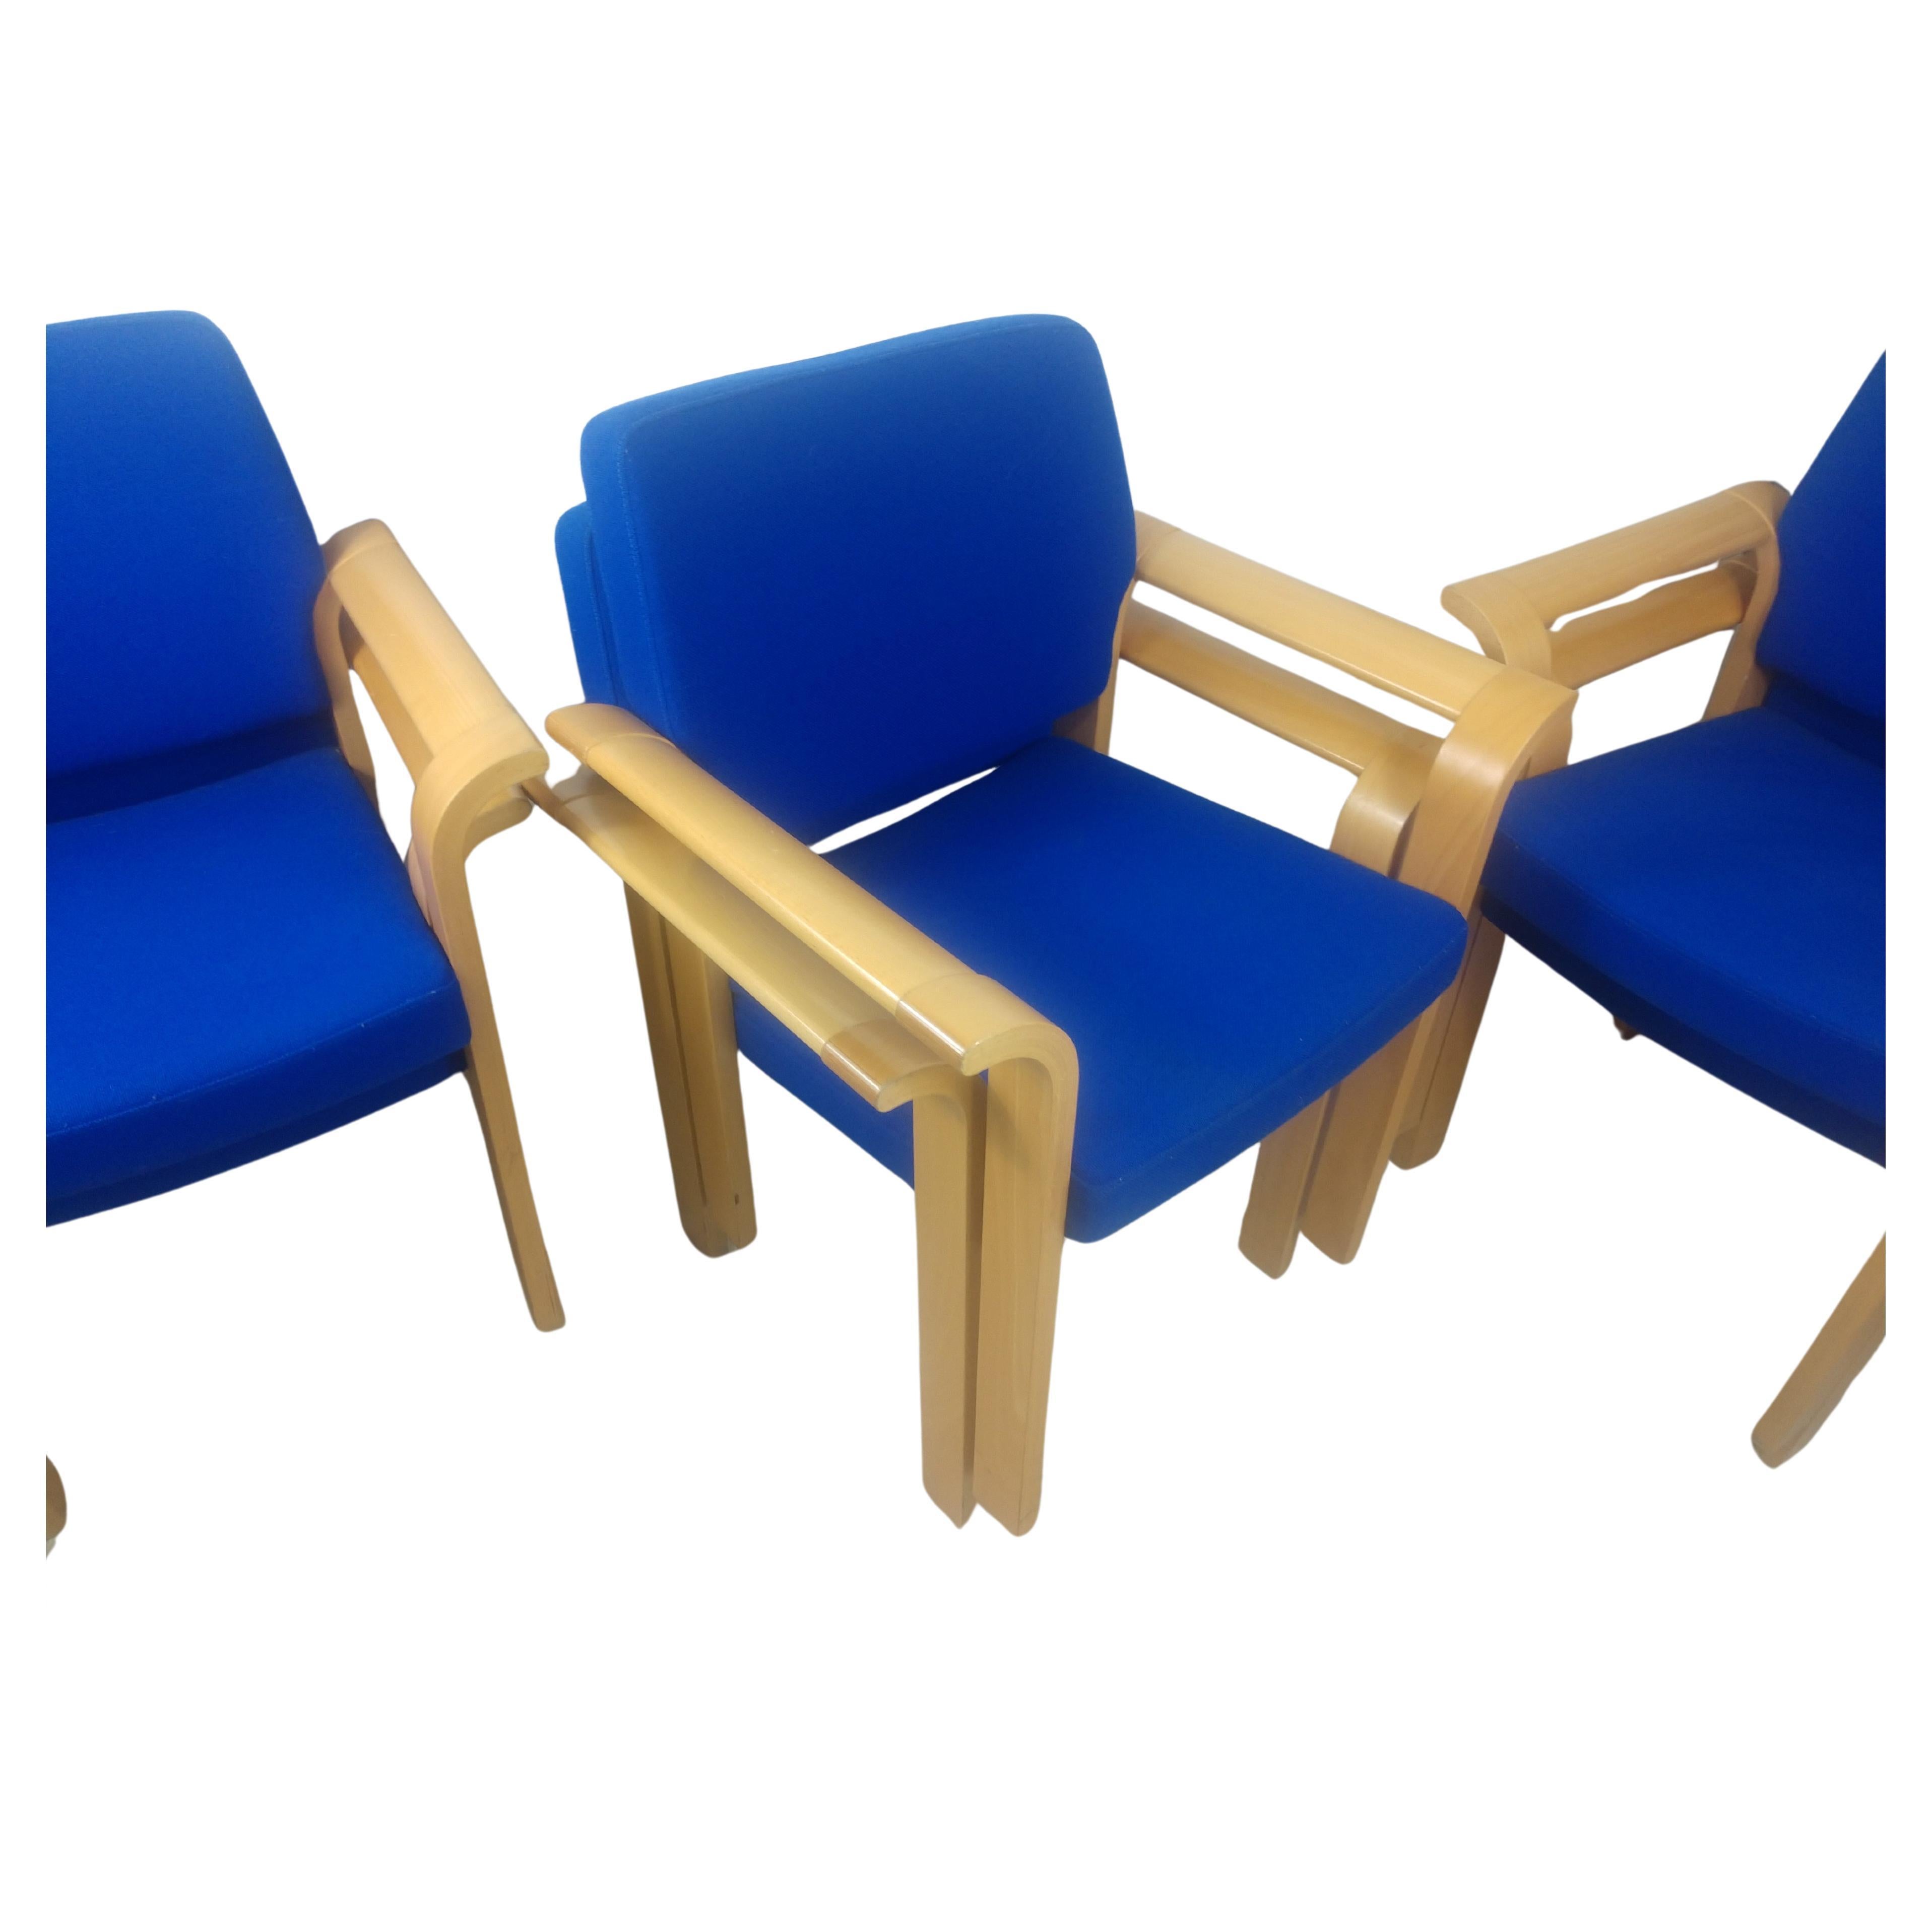 Fabulous set of mid-century oak dining conference chairs that stack. Flared bentwood arms created out of white oak and upholstered in a blue Knoll like fabric. Designed by Rud Thygesen and Johnny Sorensen for Magnus Olsen. Chairs are labelled. Seat